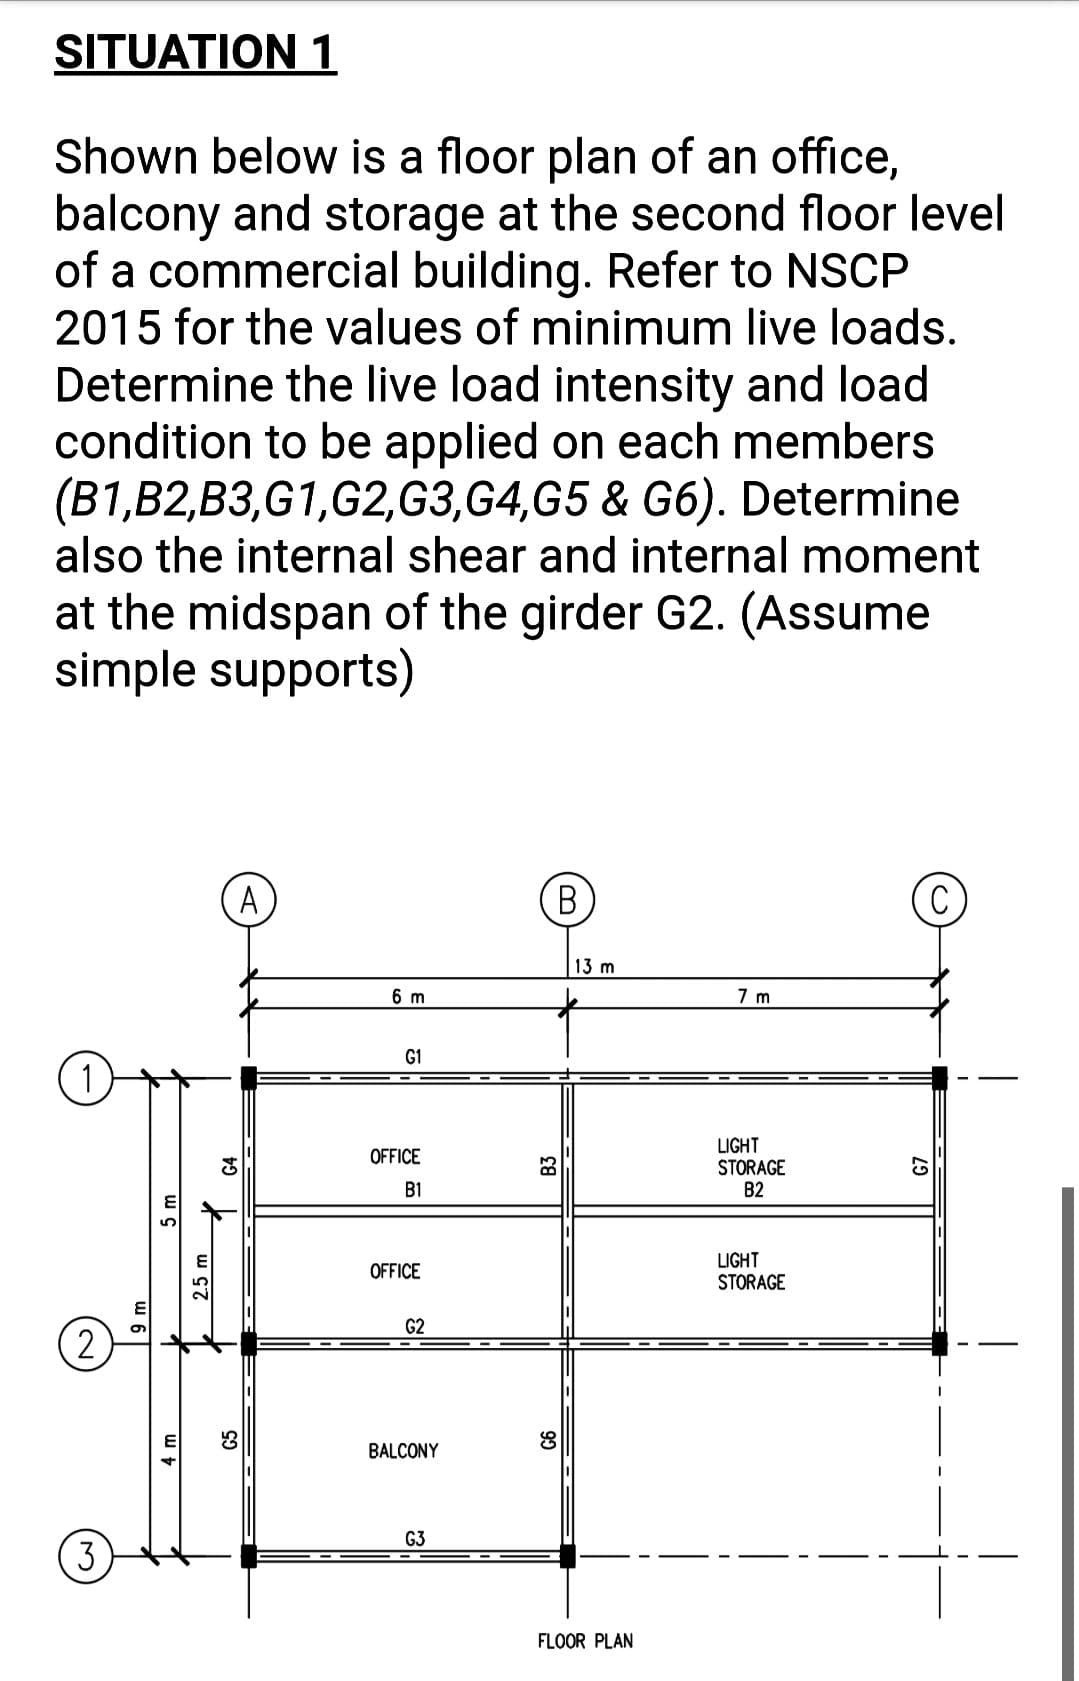 SITUATION 1
Shown below is a floor plan of an office,
balcony and storage at the second floor level
of a commercial building. Refer to NSCP
2015 for the values of minimum live loads.
Determine the live load intensity and load
condition to be applied on each members
(B1,B2,B3,G1,G2,G3,G4,G5 & G6). Determine
also the internal shear and internal moment
at the midspan of the girder G2. (Assume
simple supports)
A
(В
13 m
6 m
7 m
G1
1)
LIGHT
STORAGE
B2
OFFICE
B1
LIGHT
STORAGE
OFFICE
G2
2.
BALCONY
G3
3
FLOOR PLAN
4 m
5m
G5
B3
93
